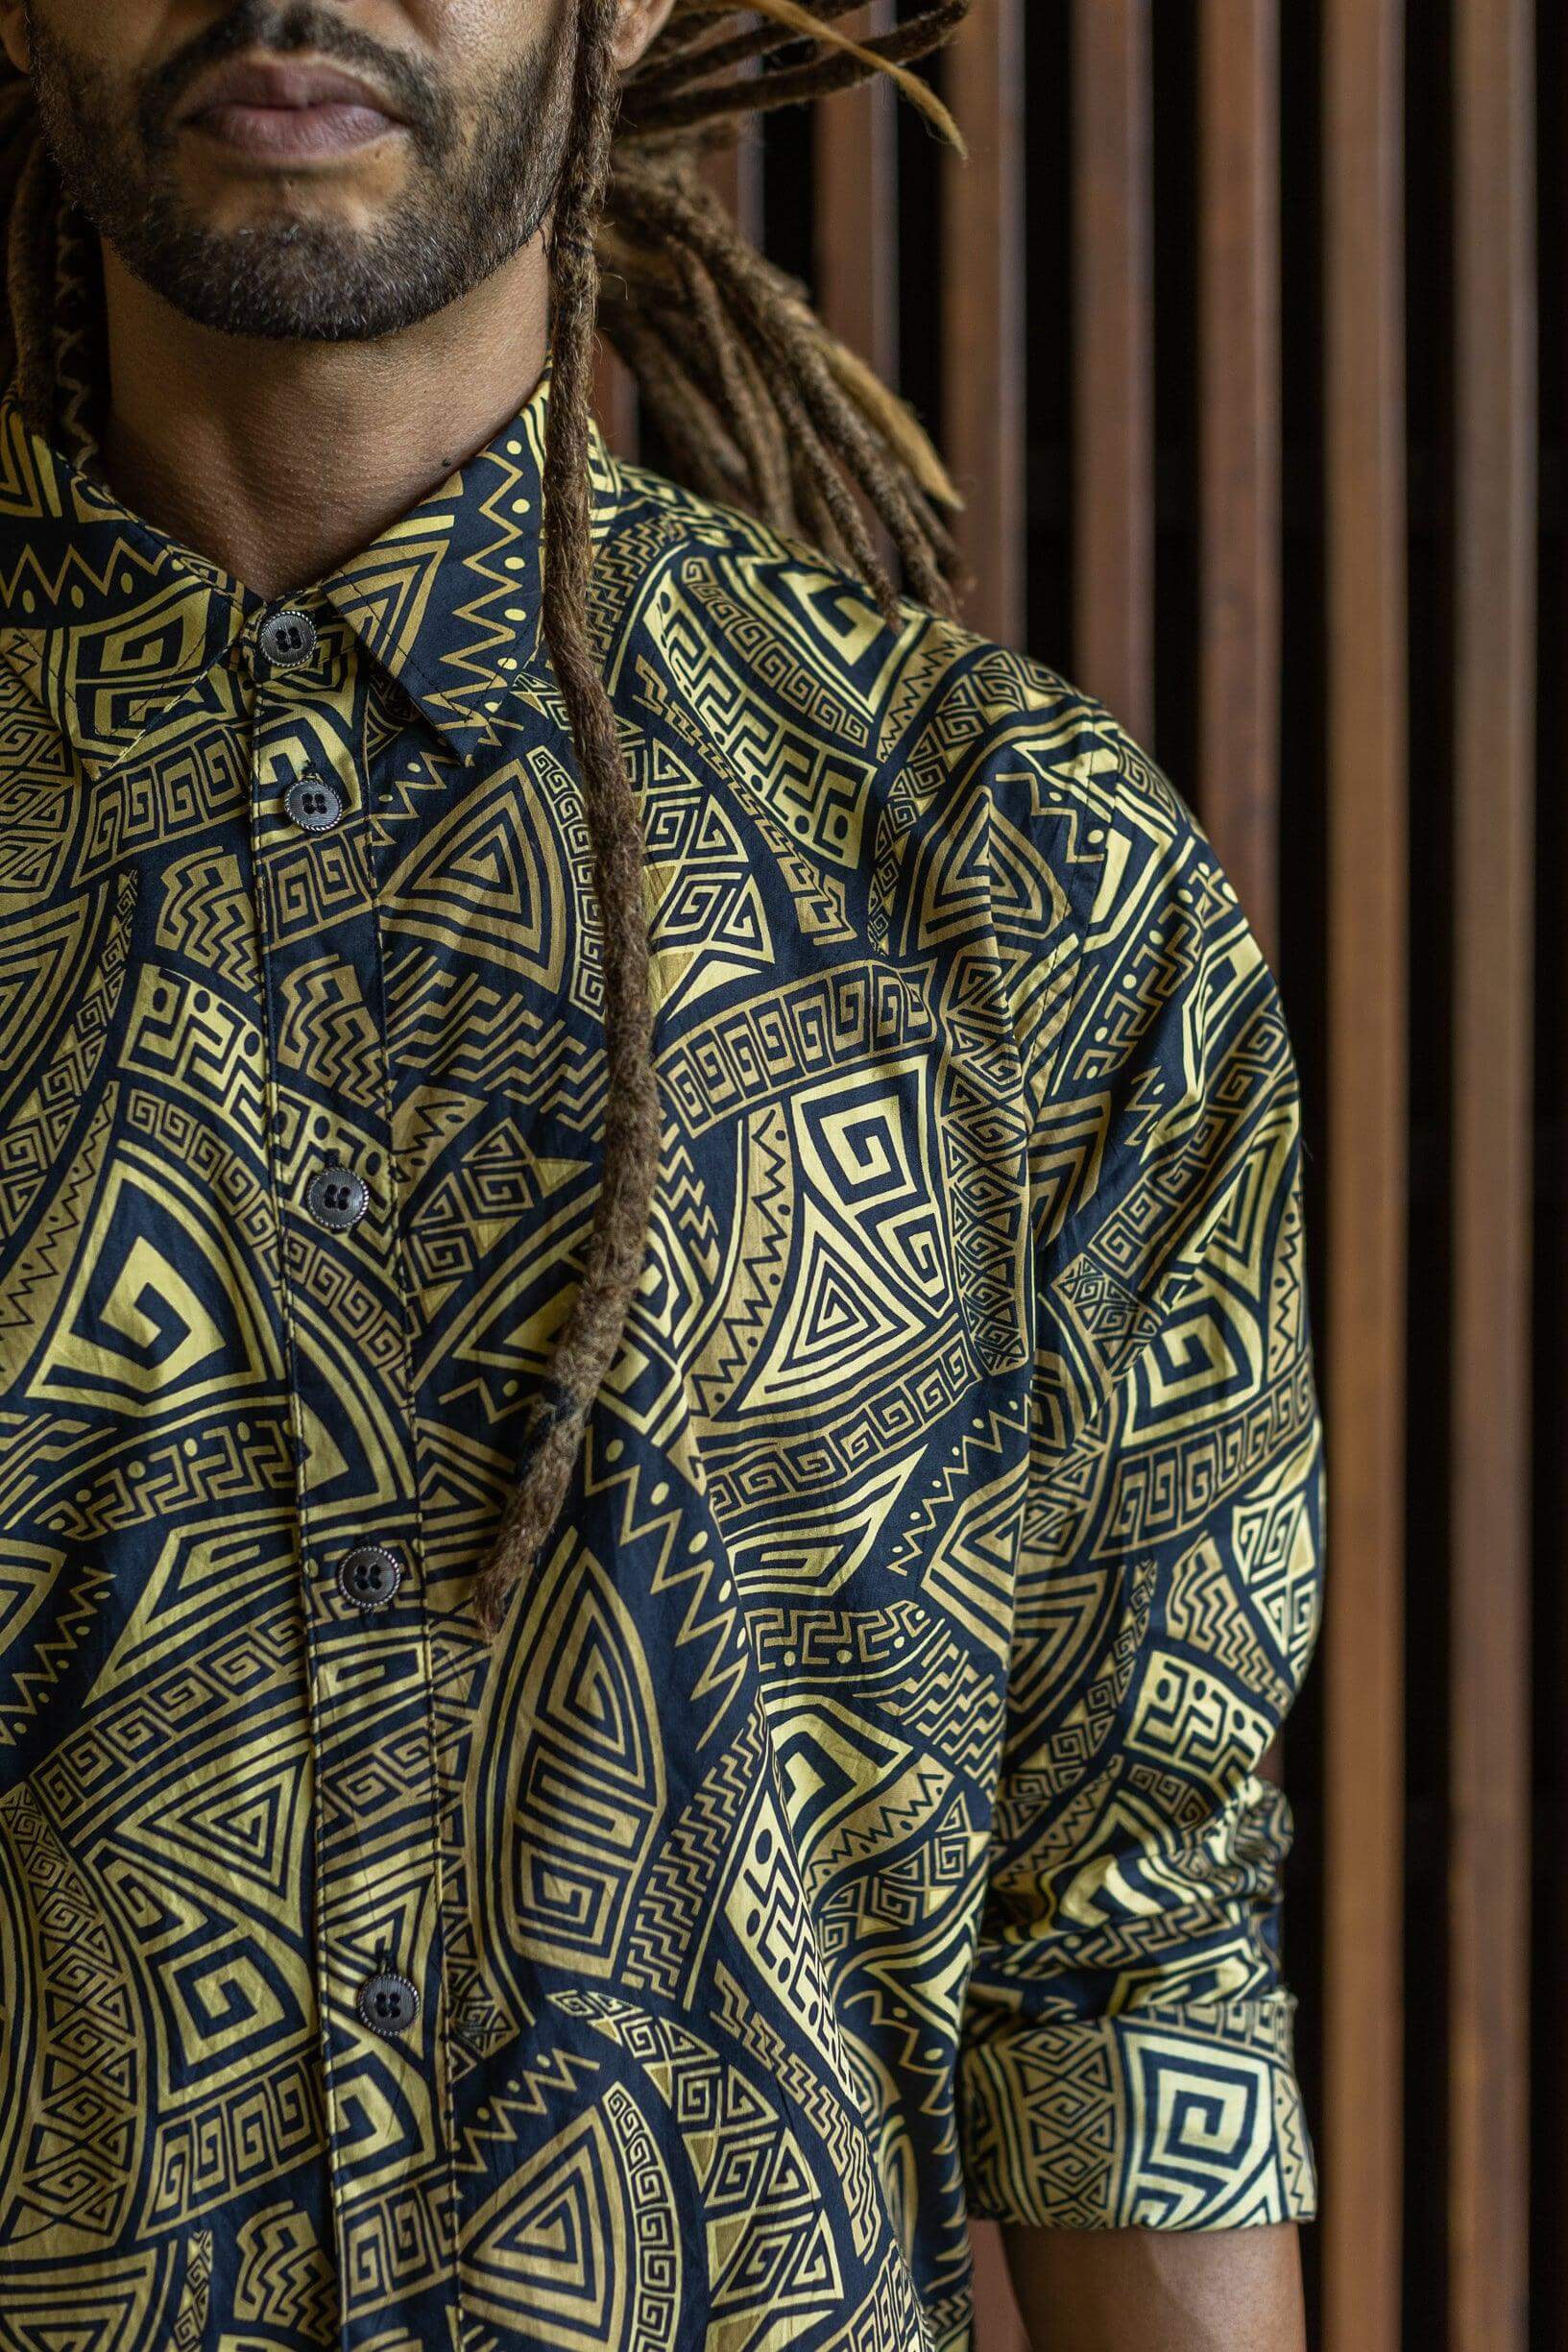 VALO SPIRIT PANTAI Black & Gold Tribal - A classic slim fit button up shirt with unique print - VALO Design Clothing 